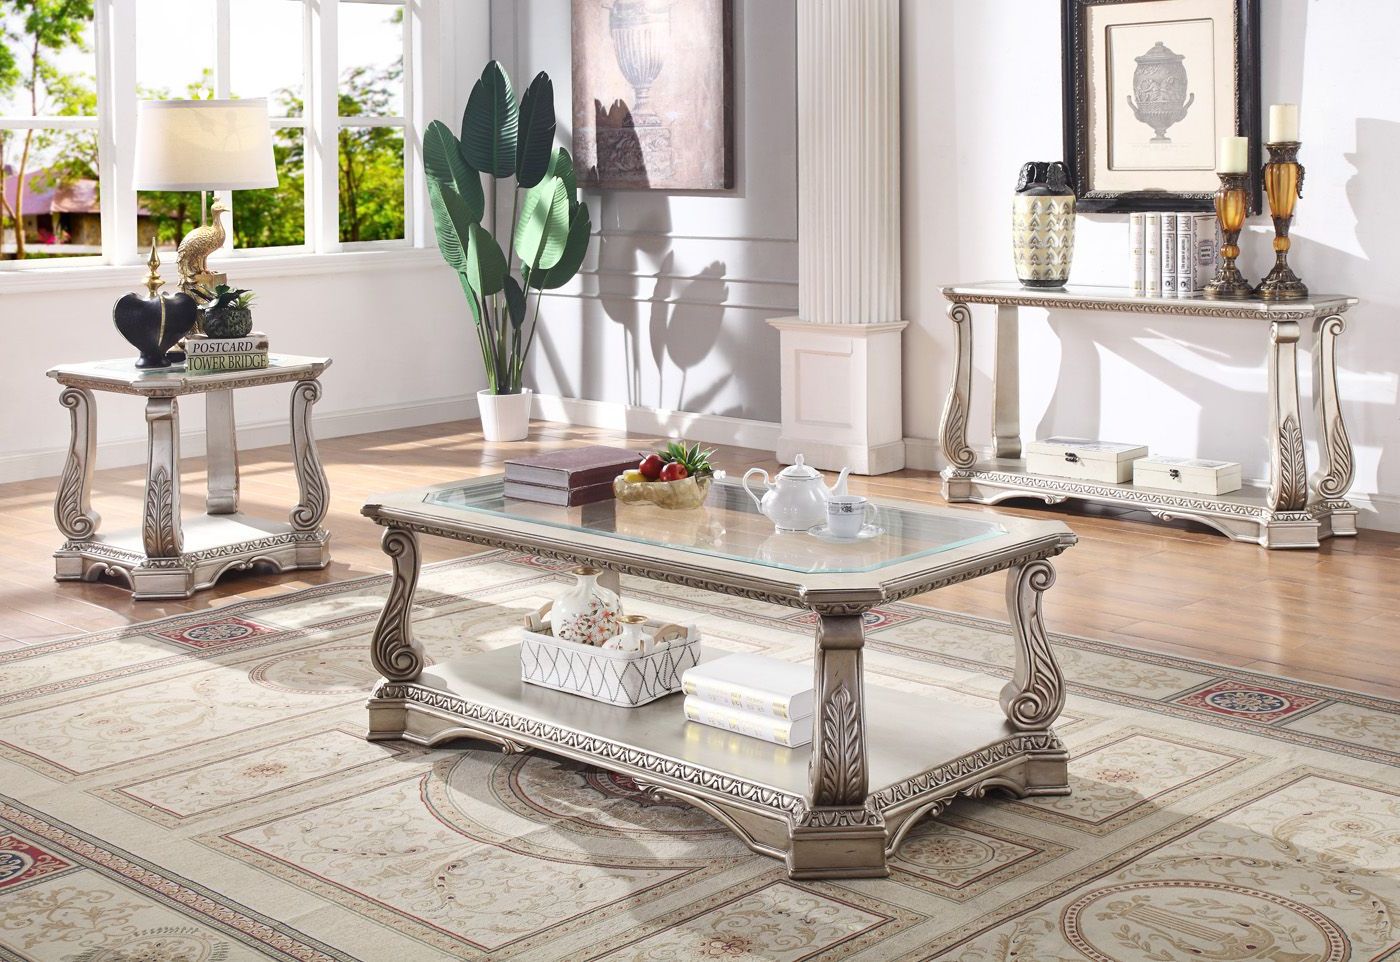 Walnut And Gold Rectangular Coffee Tables Inside Most Recent Traditional Rectangular Glass Top Coffee Table Antique (View 9 of 20)